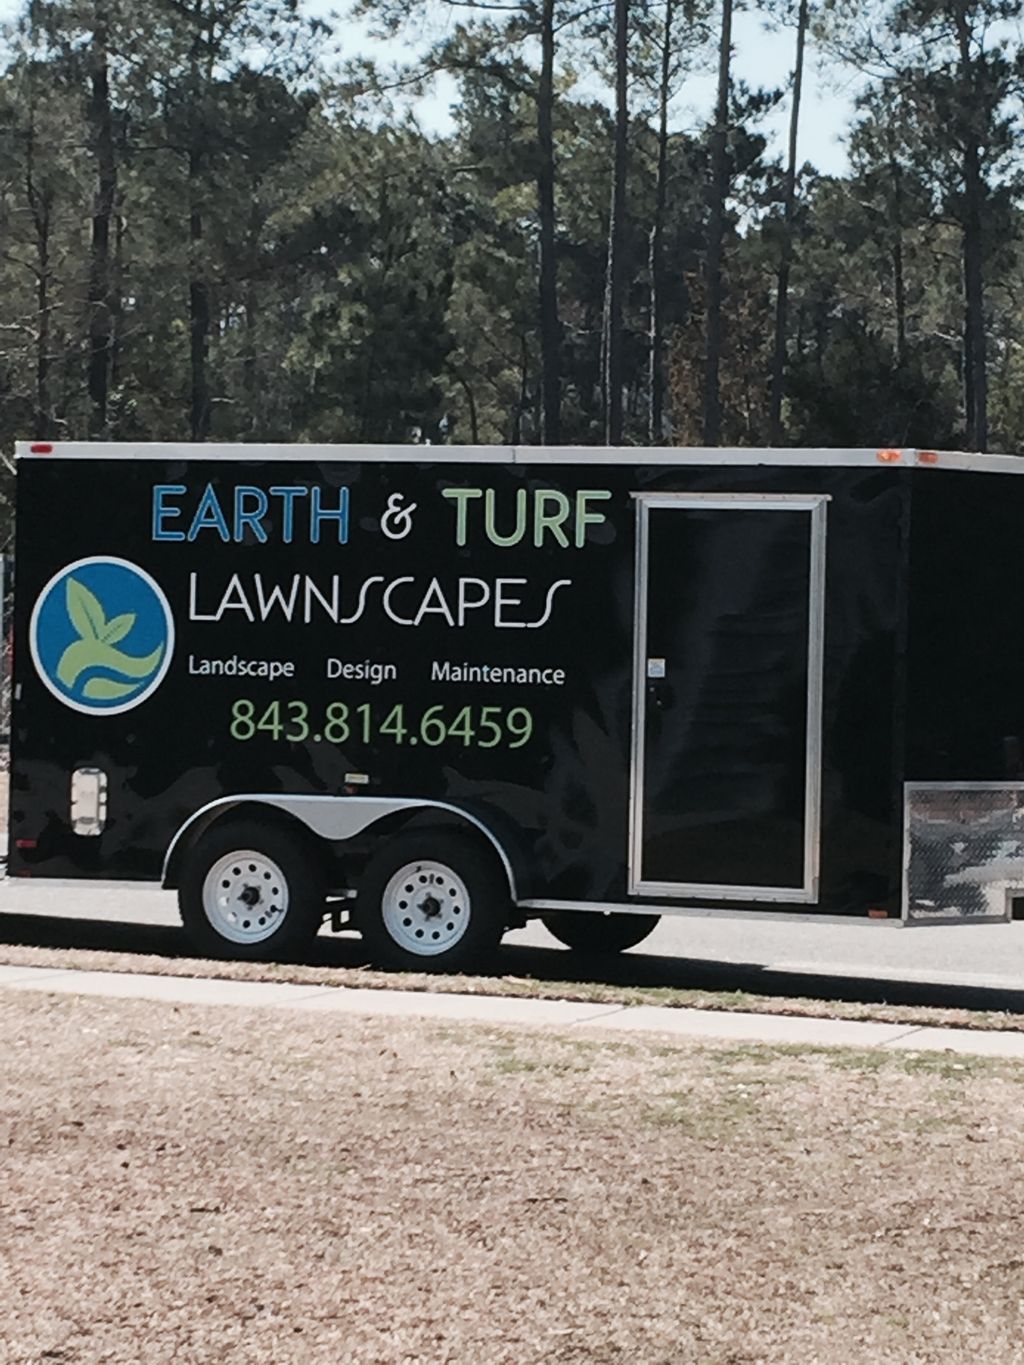 Earth & Turf Lawnscapes